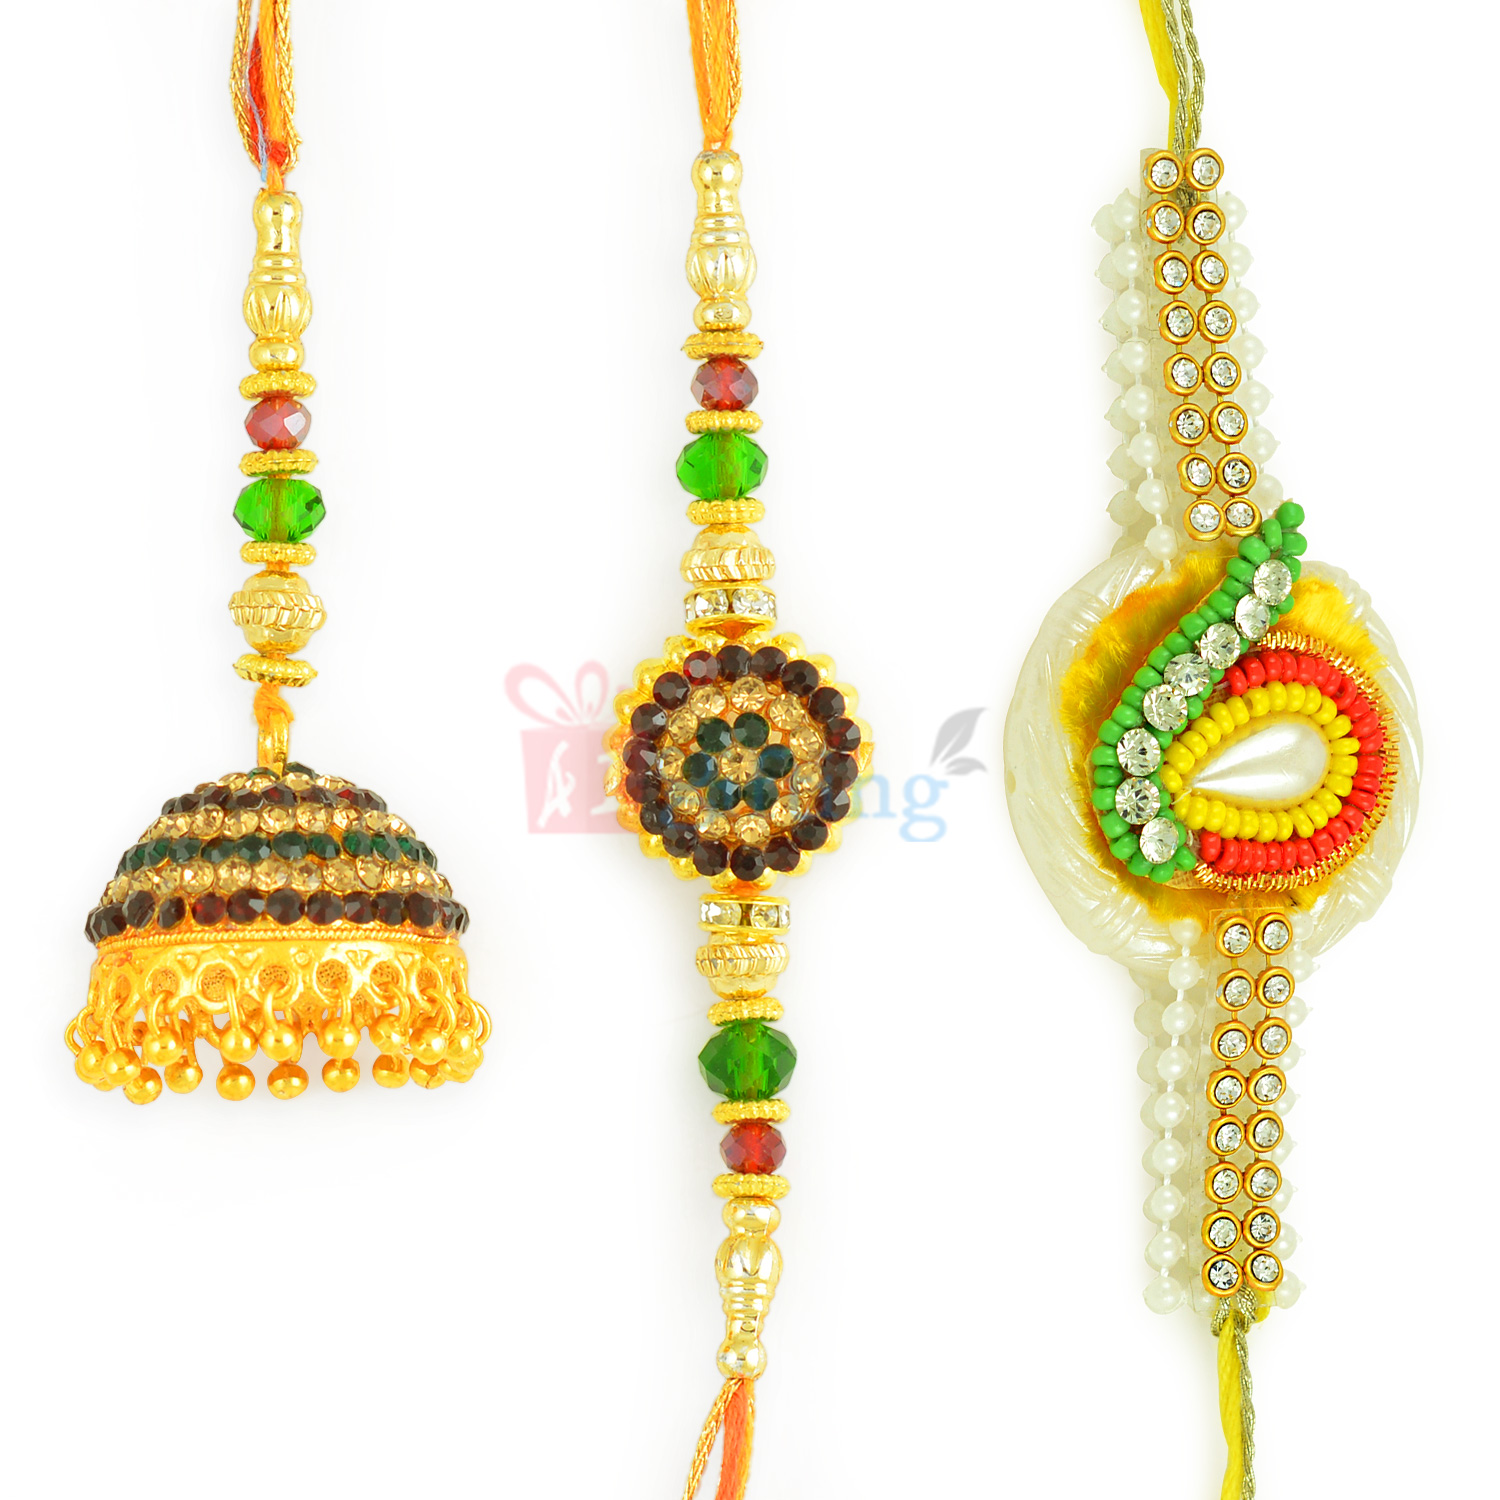 Exclusive Selection of Pearl and Golden Rakhis